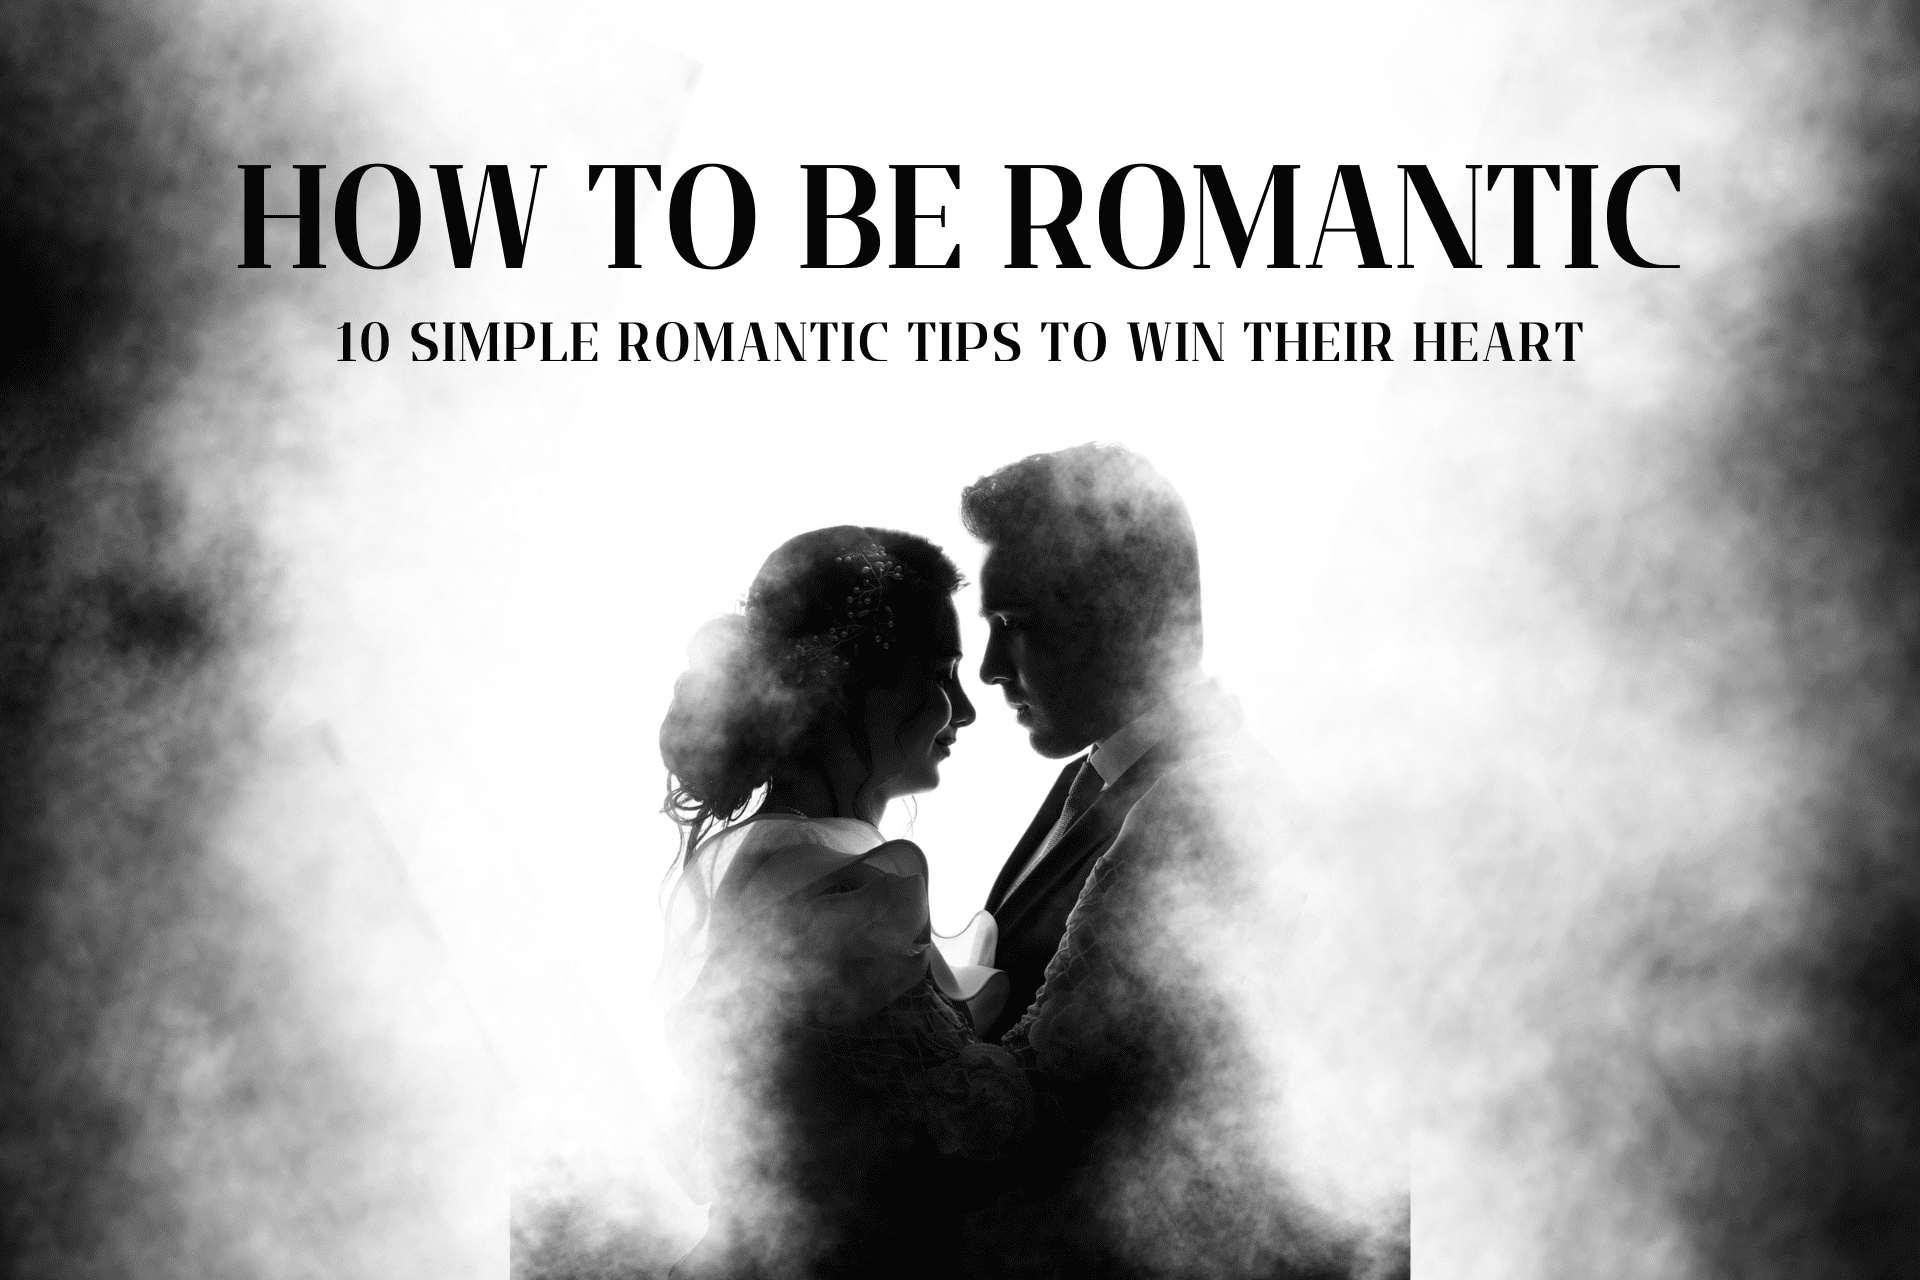 How to Be Romantic